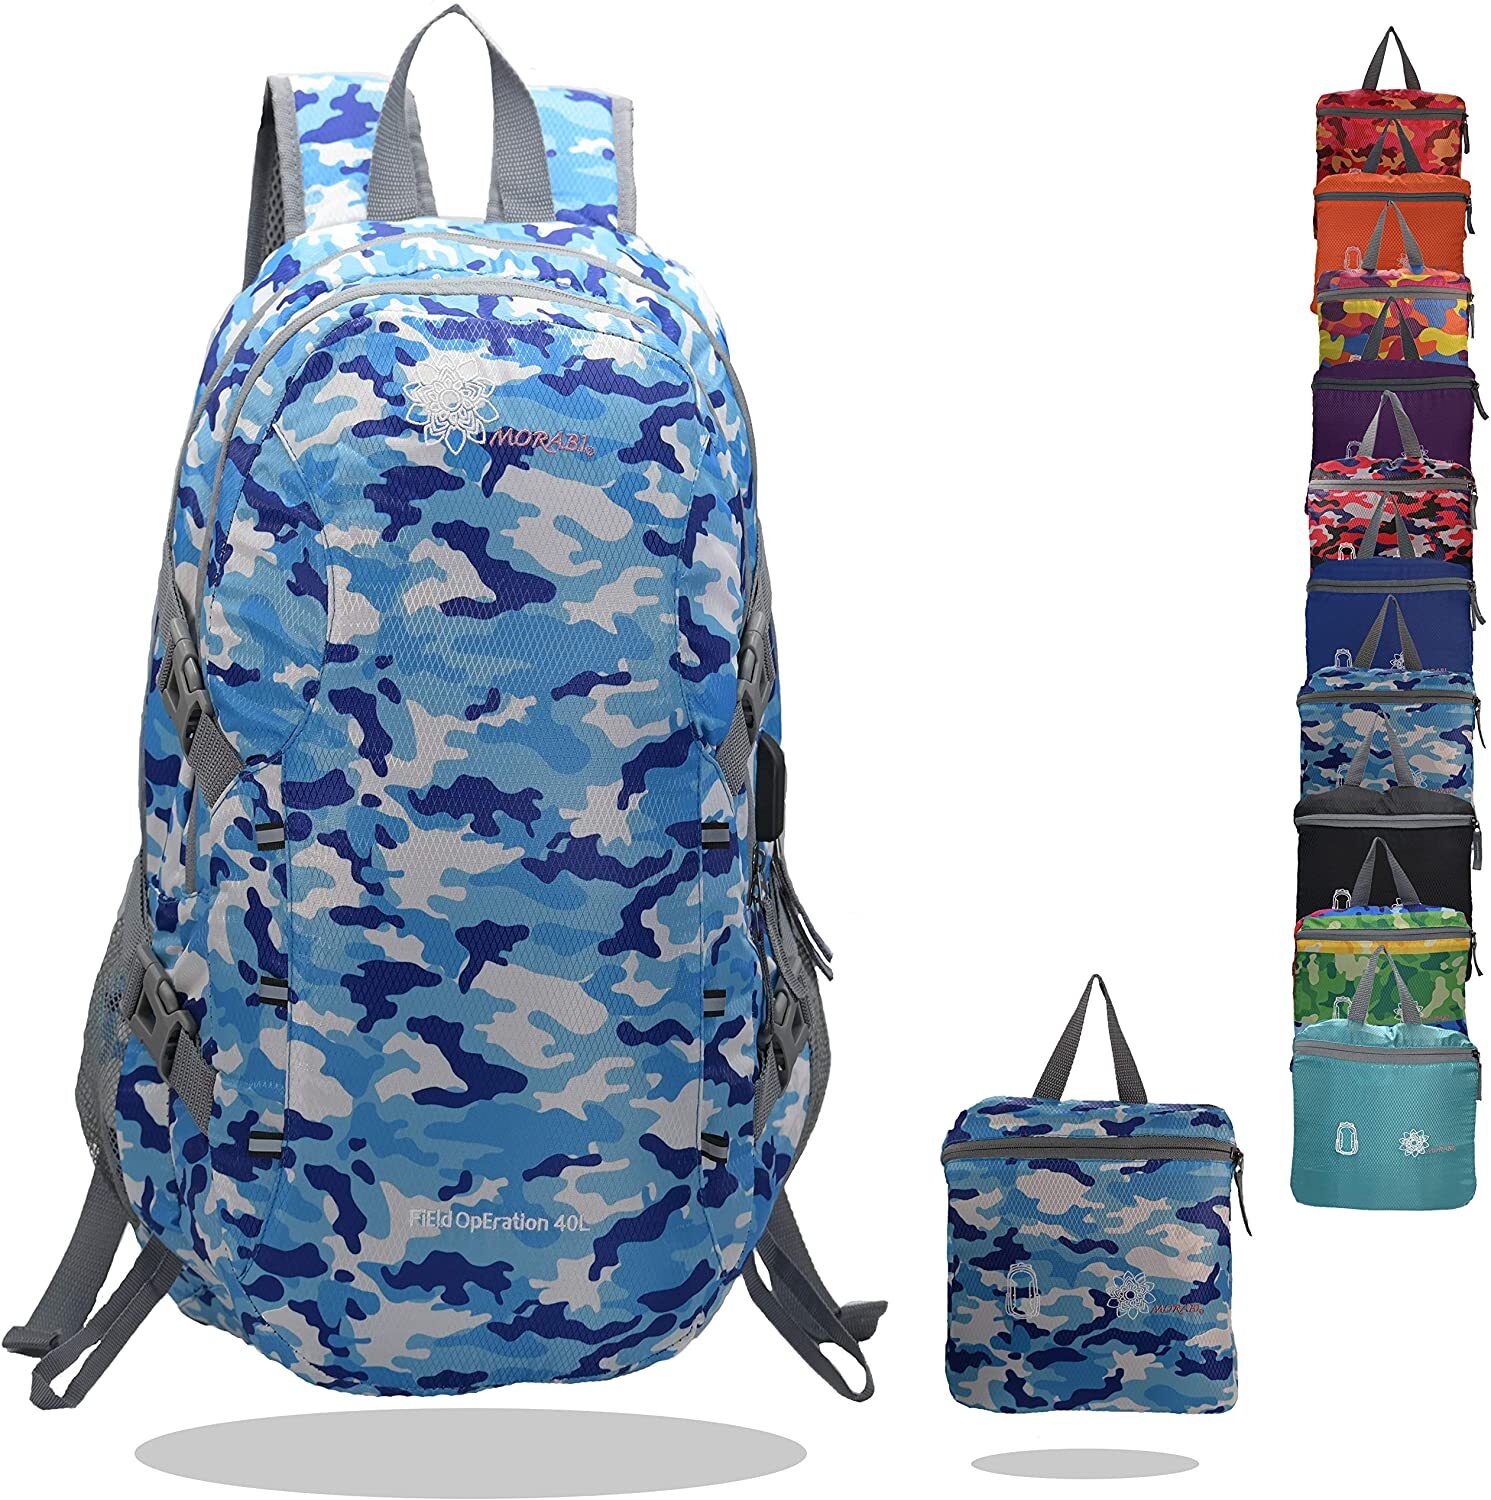 Camping Backpack - Blue Camo